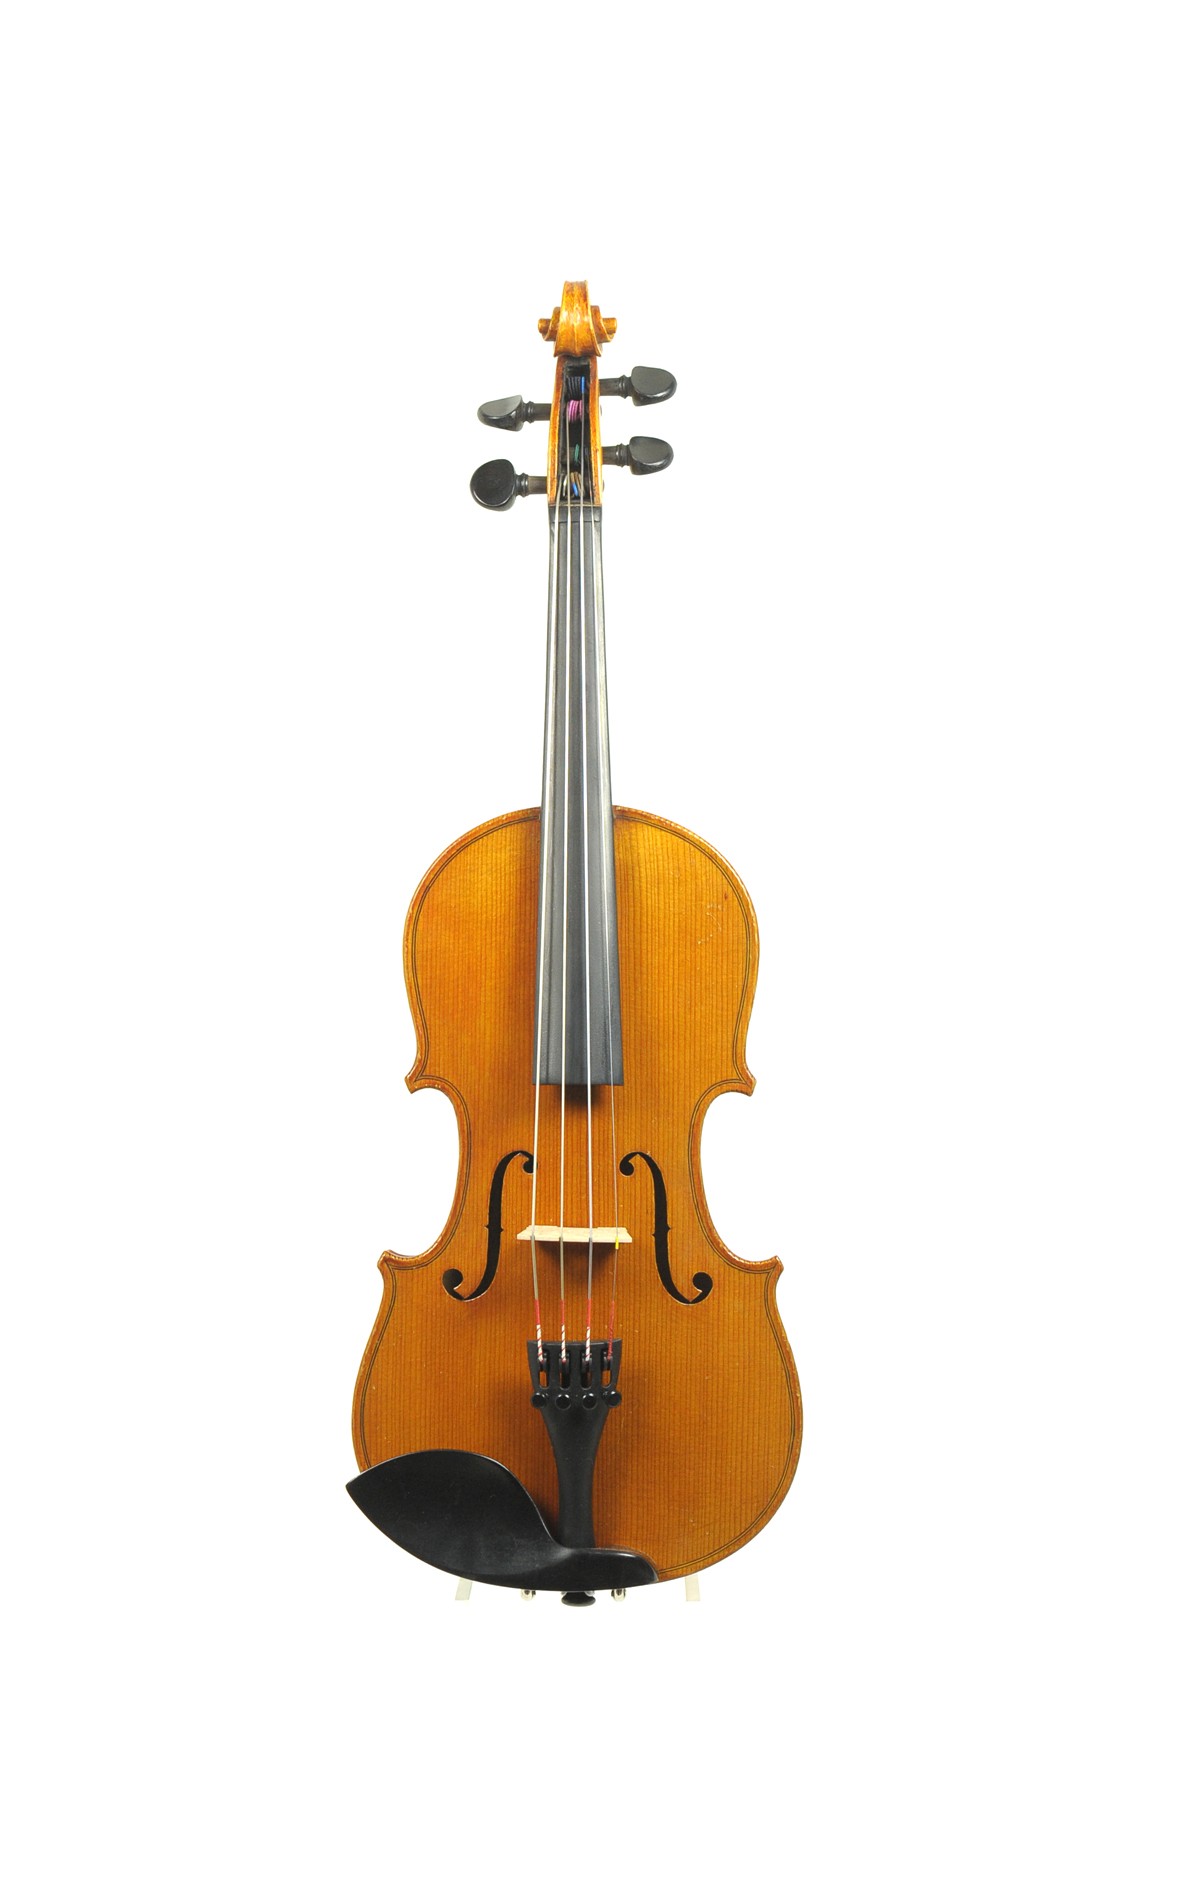 French 1/8 violin - top